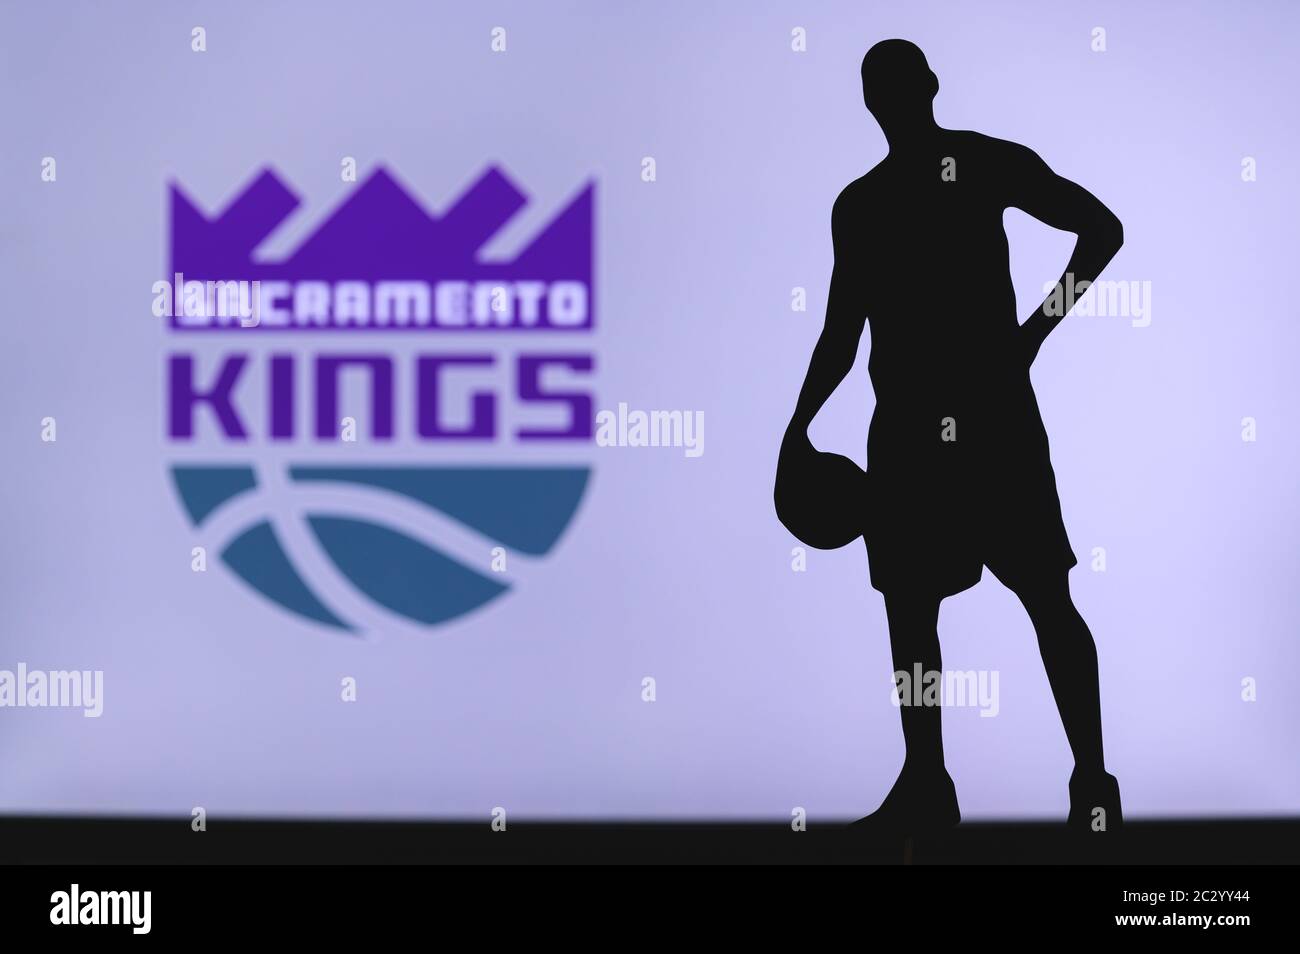 NEW YORK, USA, JUN 18, 2020: Sacramento Kings logo of professional basketball club in american league. Silhouette of basket player in foreground. Spor Stock Photo